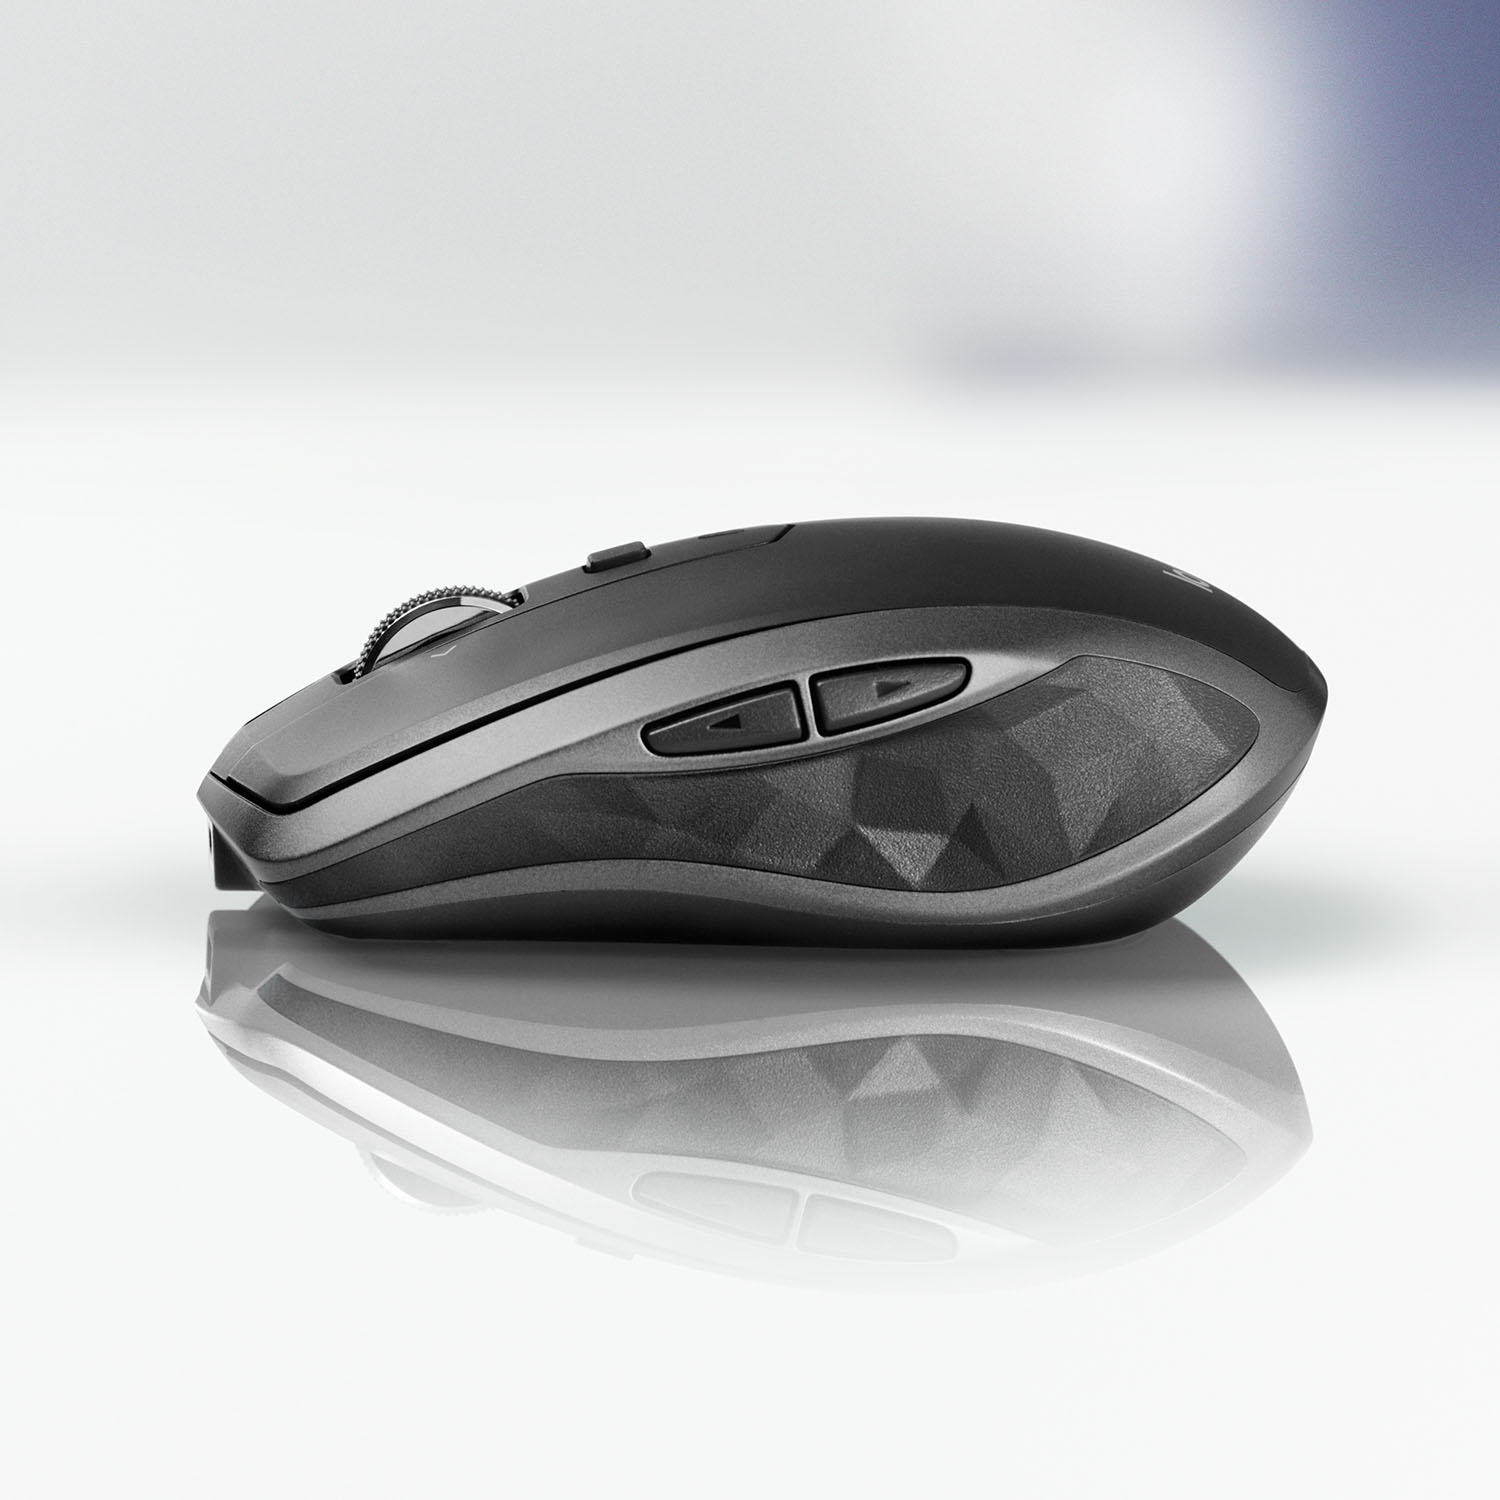 Right now you can grab a Logitech MX Anywhere 2S mouse for just $35